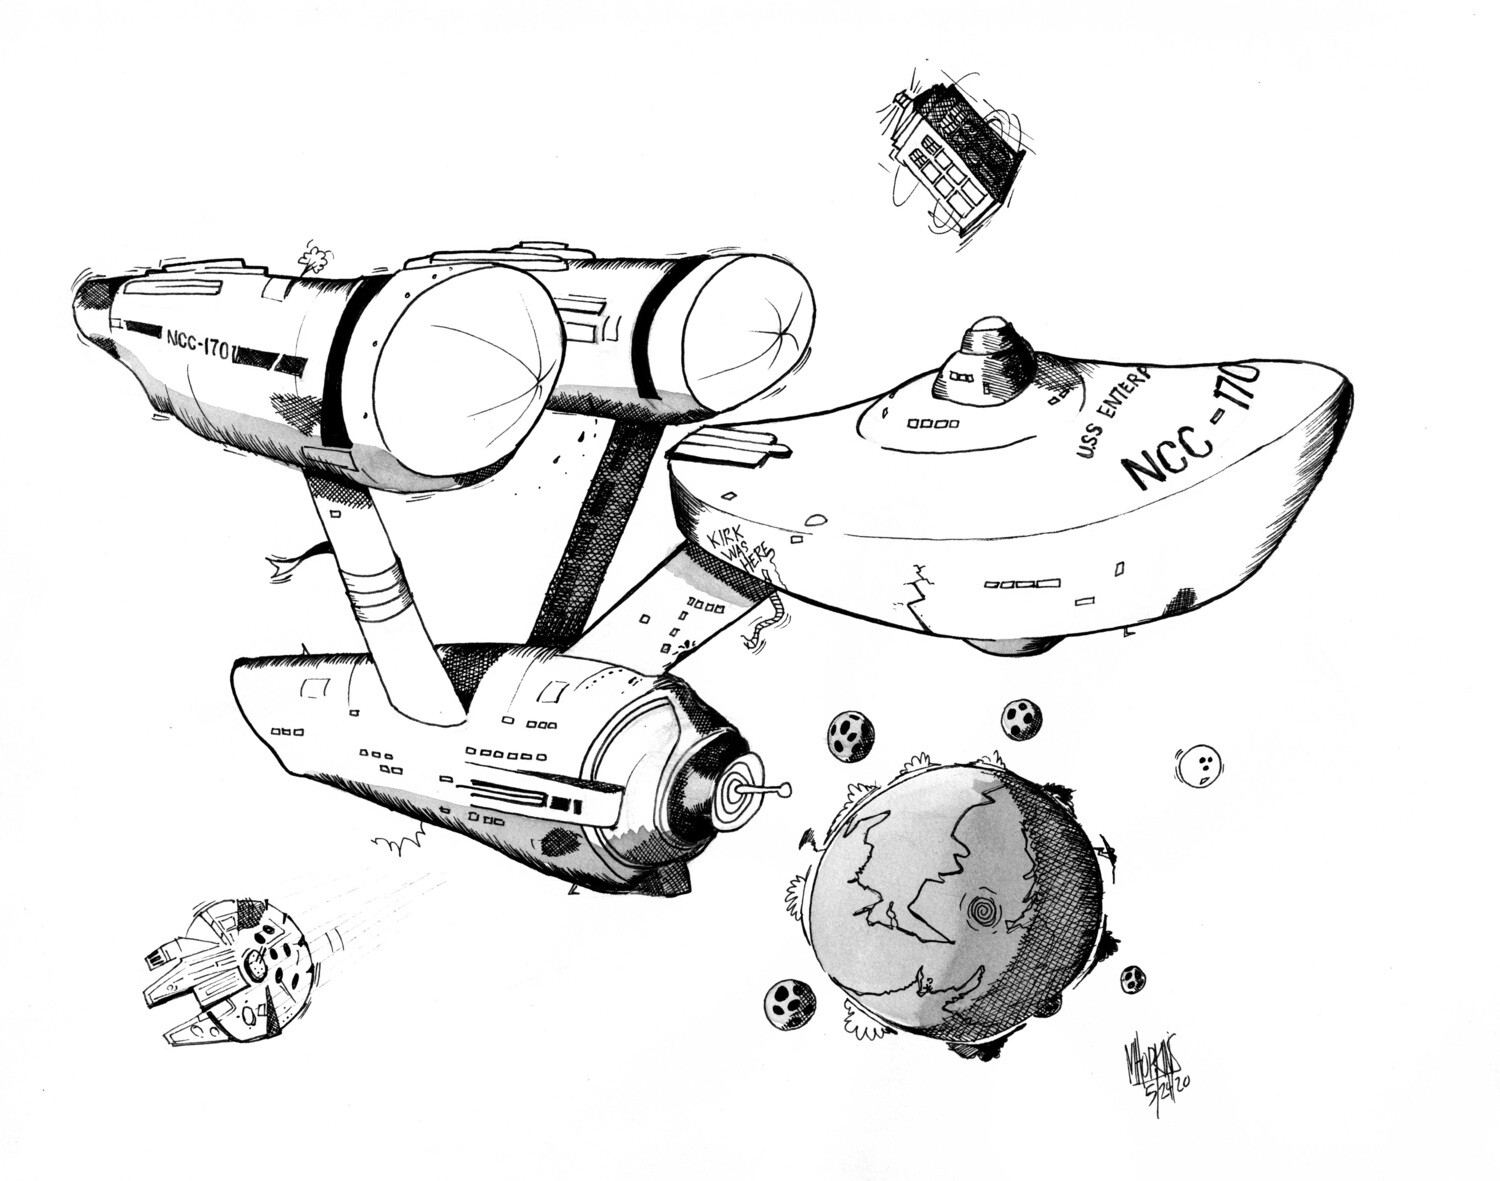 USS Enterprise - Caricature Limited Edition Giclée Prints from $50 to $75